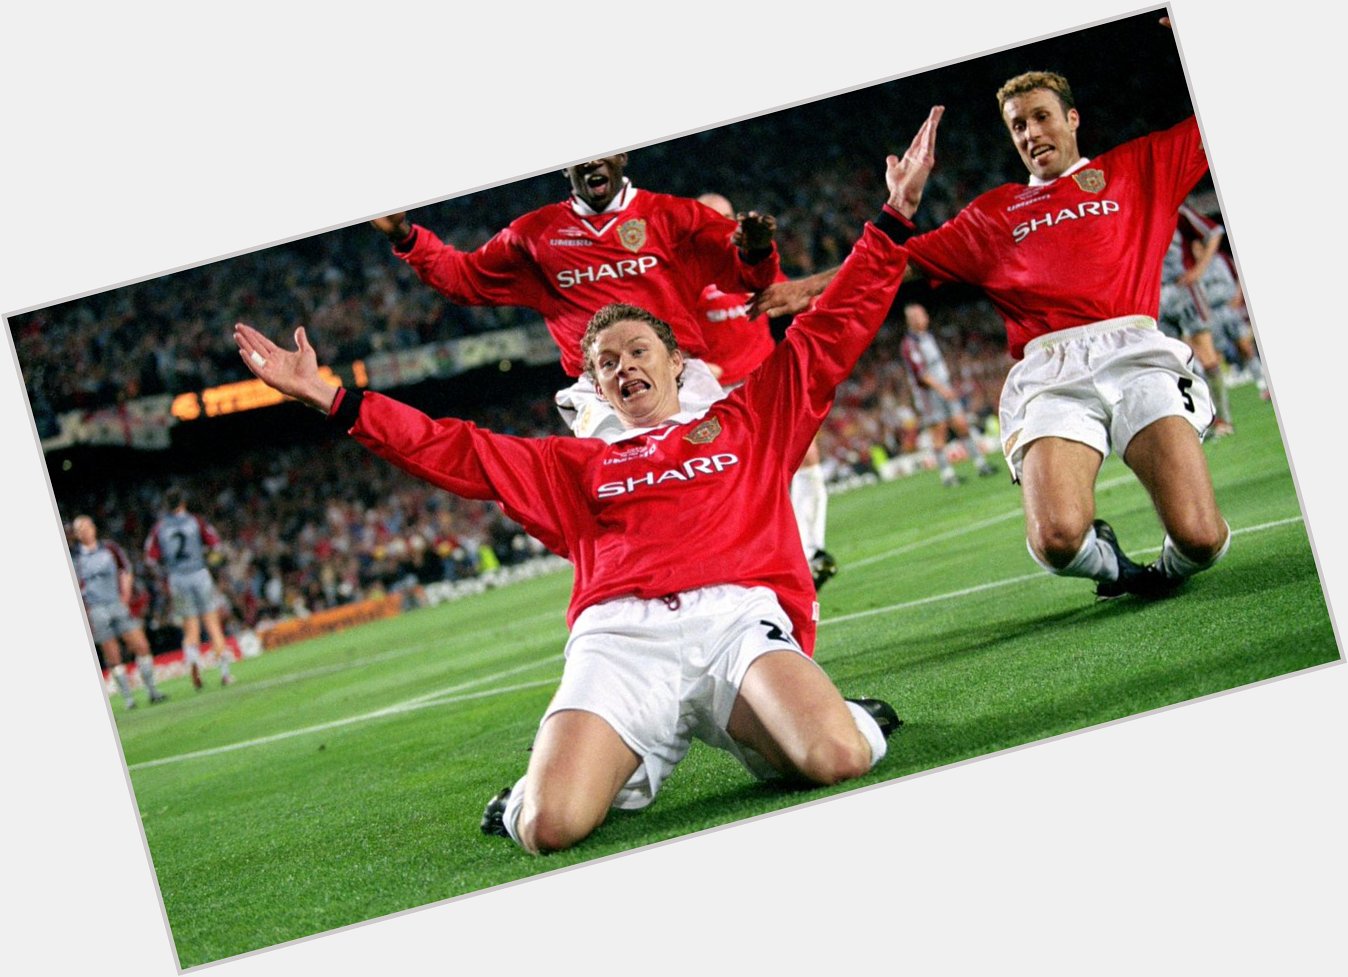 Happy Birthday to the legend Ole Gunnar Solskjaer. Best birthday present today was winning the cup  